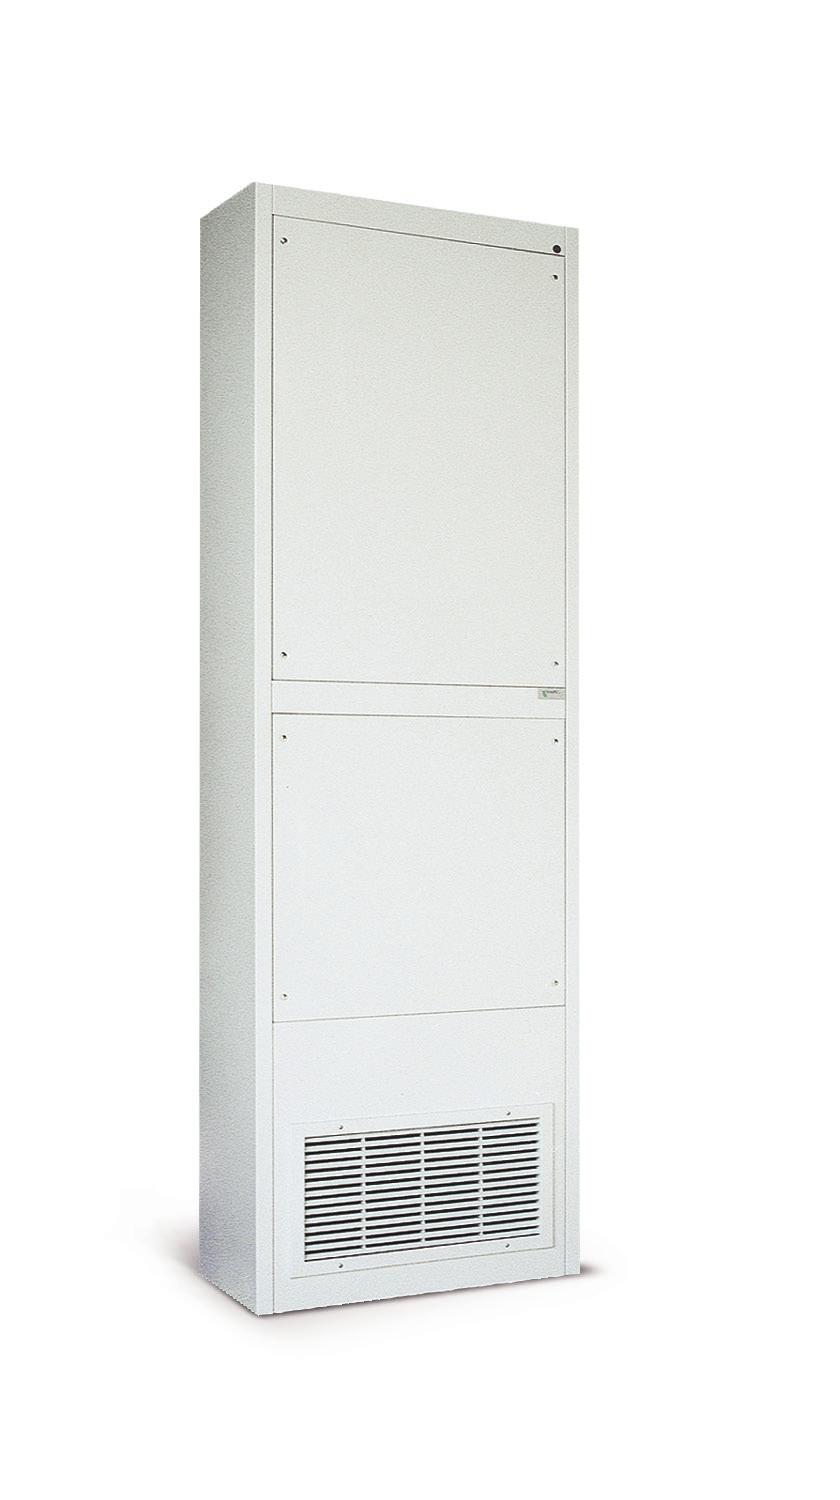 Classroom & High-Rise Dehumidifying Air Handlers > > Provides the small footprint required in classroom vertical air handling applications. Ideal in hydronic cooling and/or heating installations.